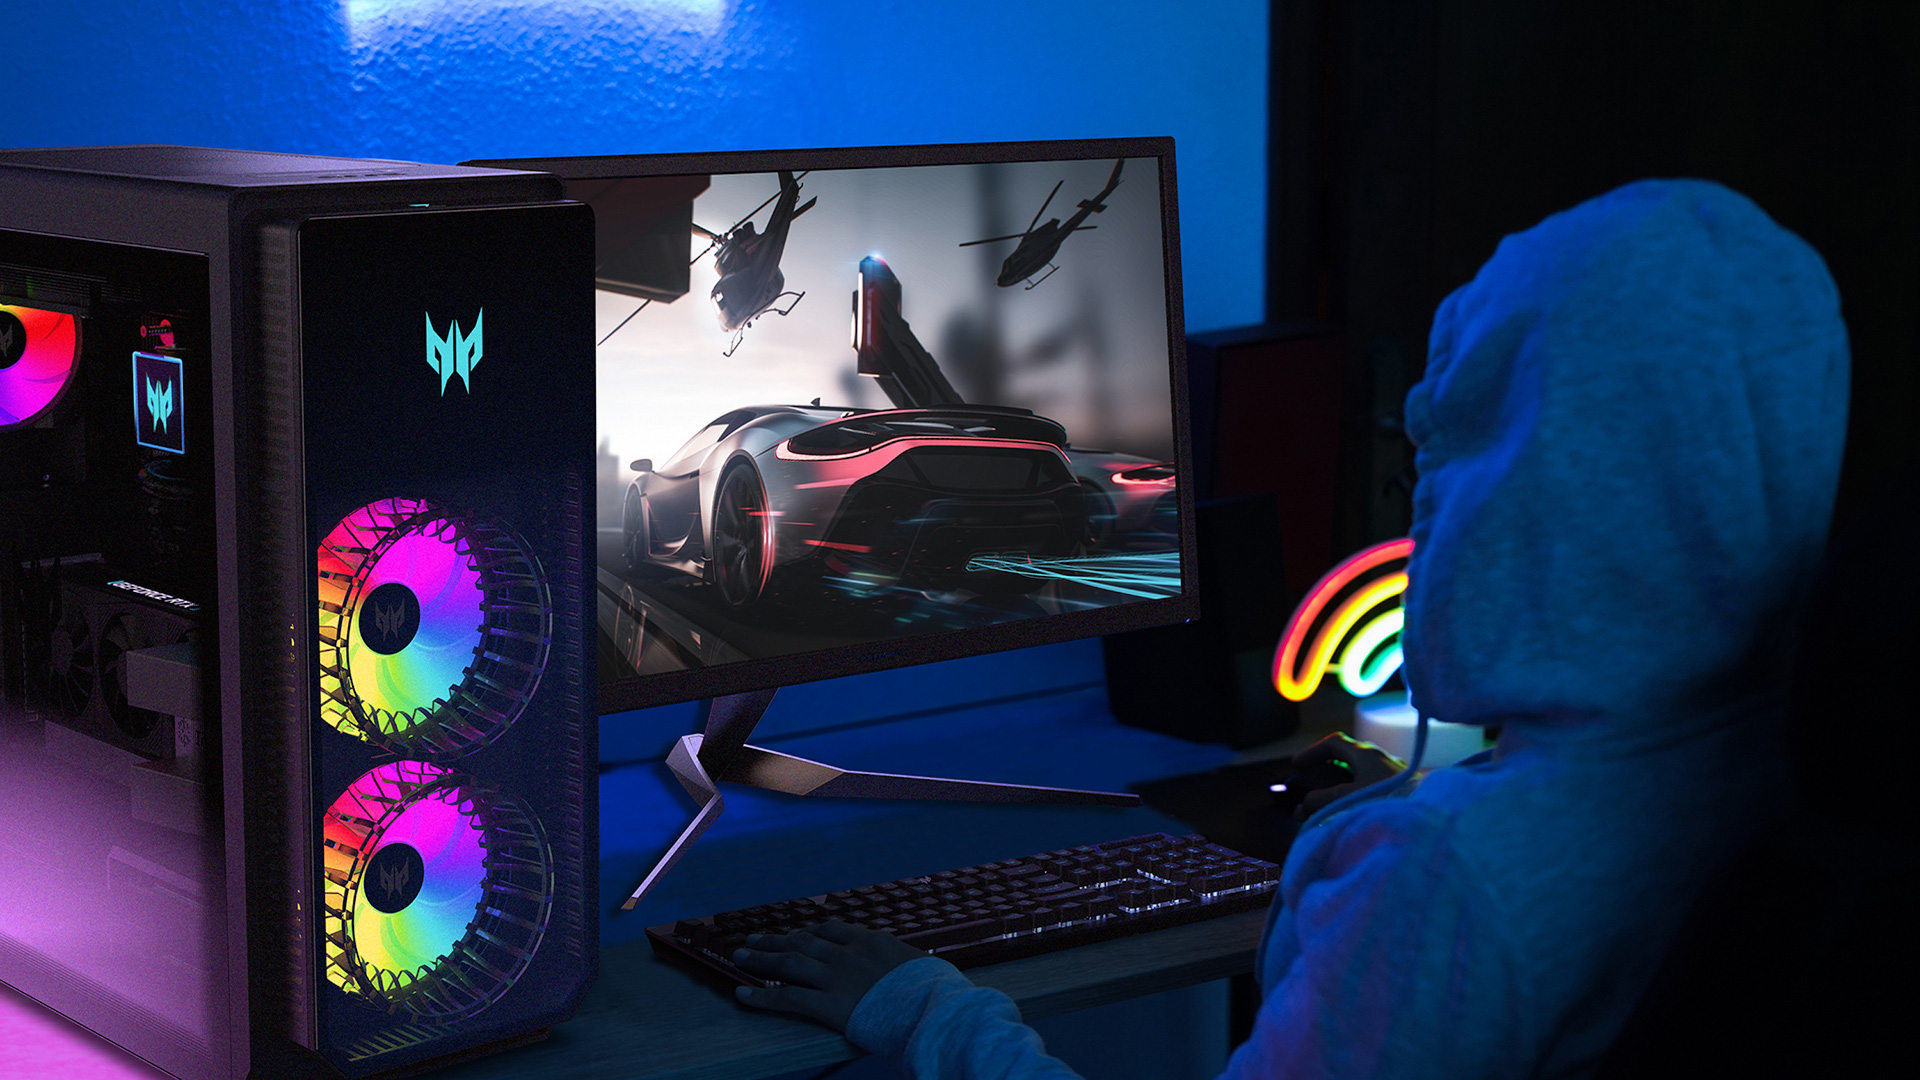 Acer Predator Orion 7000 desktop gaming PC shown on a desk next to monitor